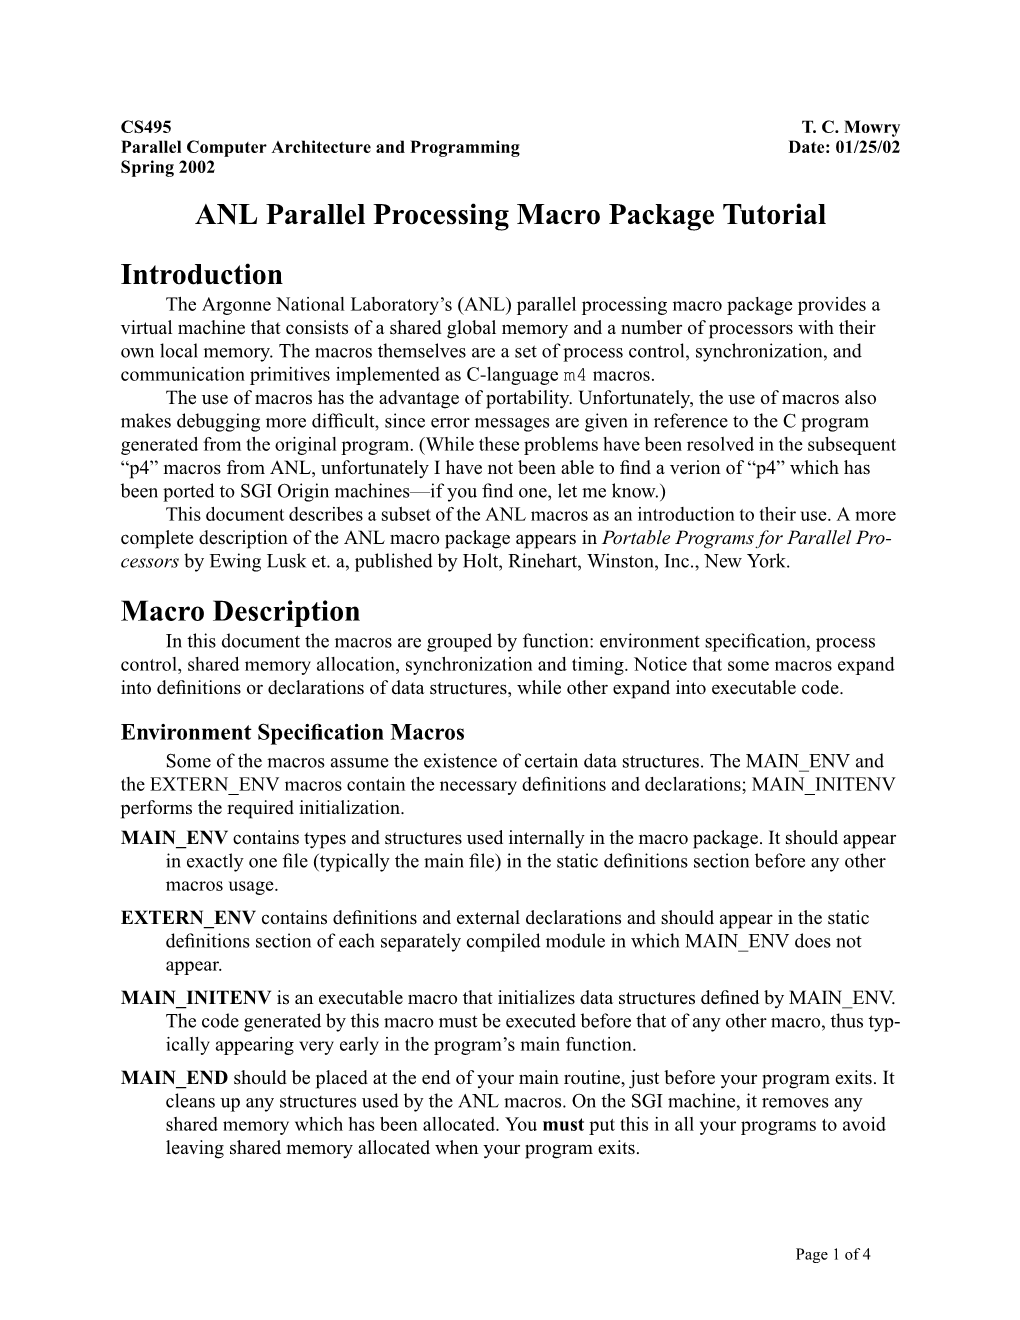 ANL Parallel Processing Macro Package Tutorial Introduction